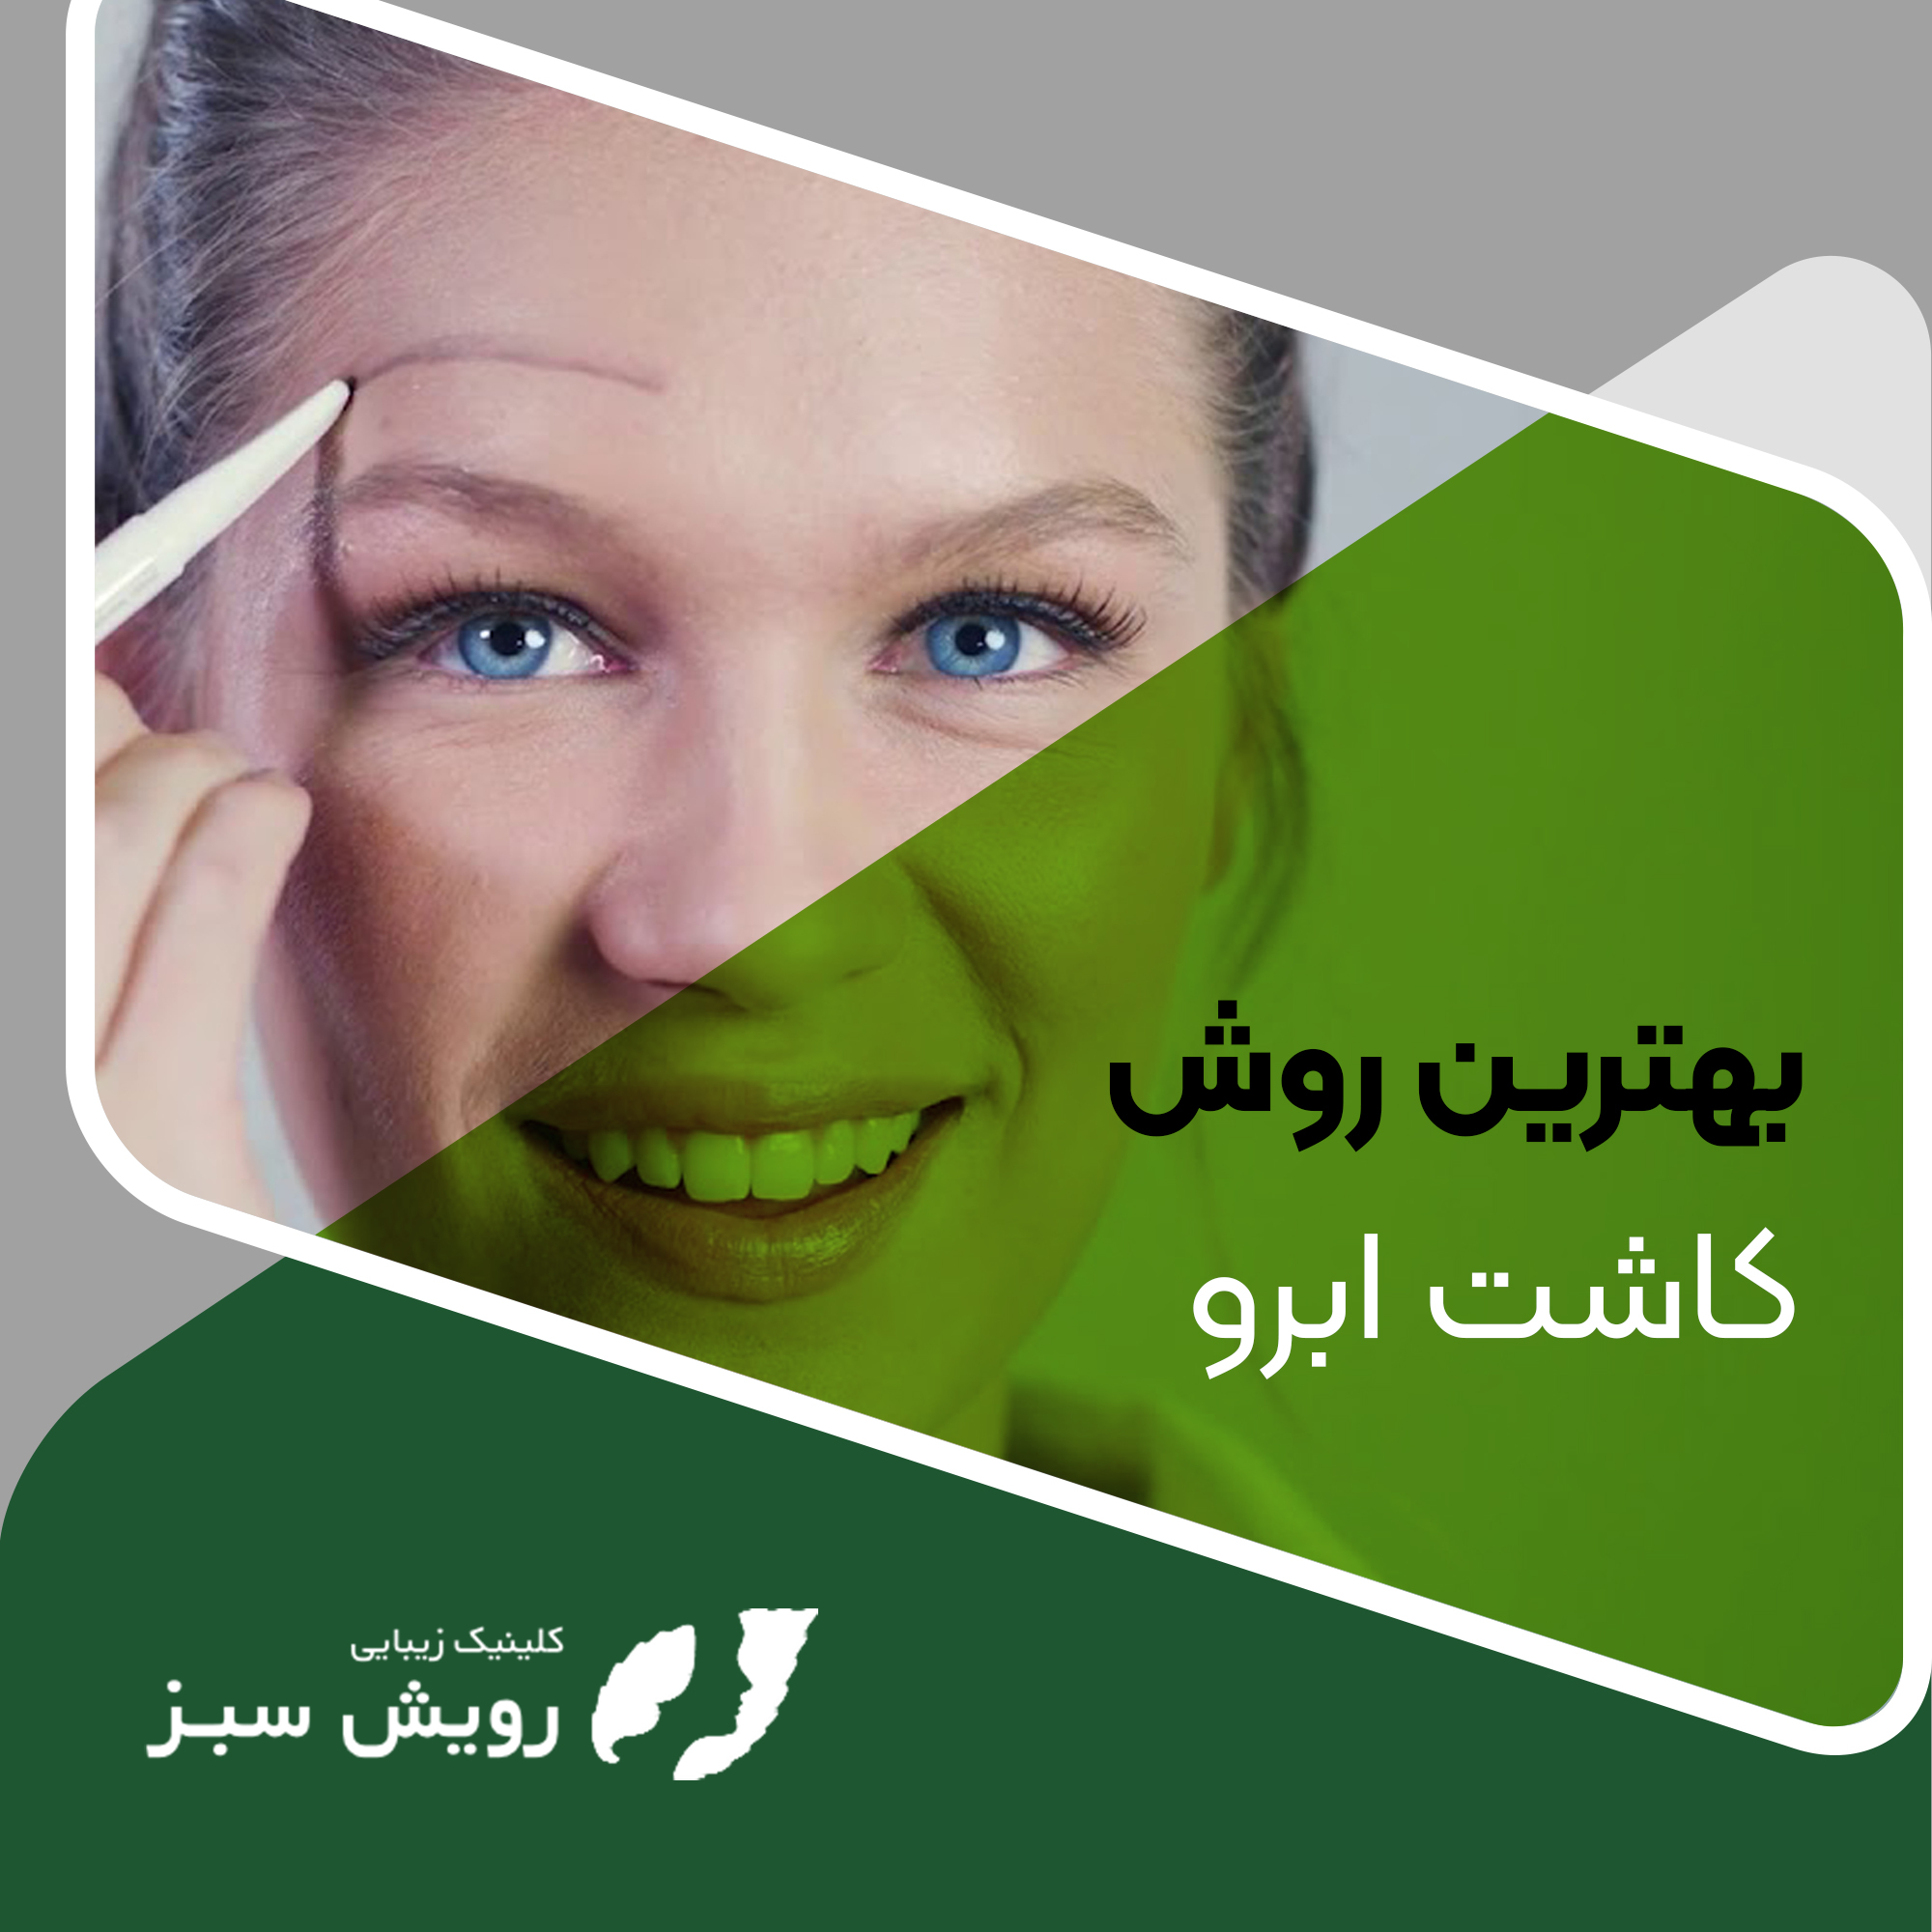 You are currently viewing بهترین روش کاشت ابرو چیست؟